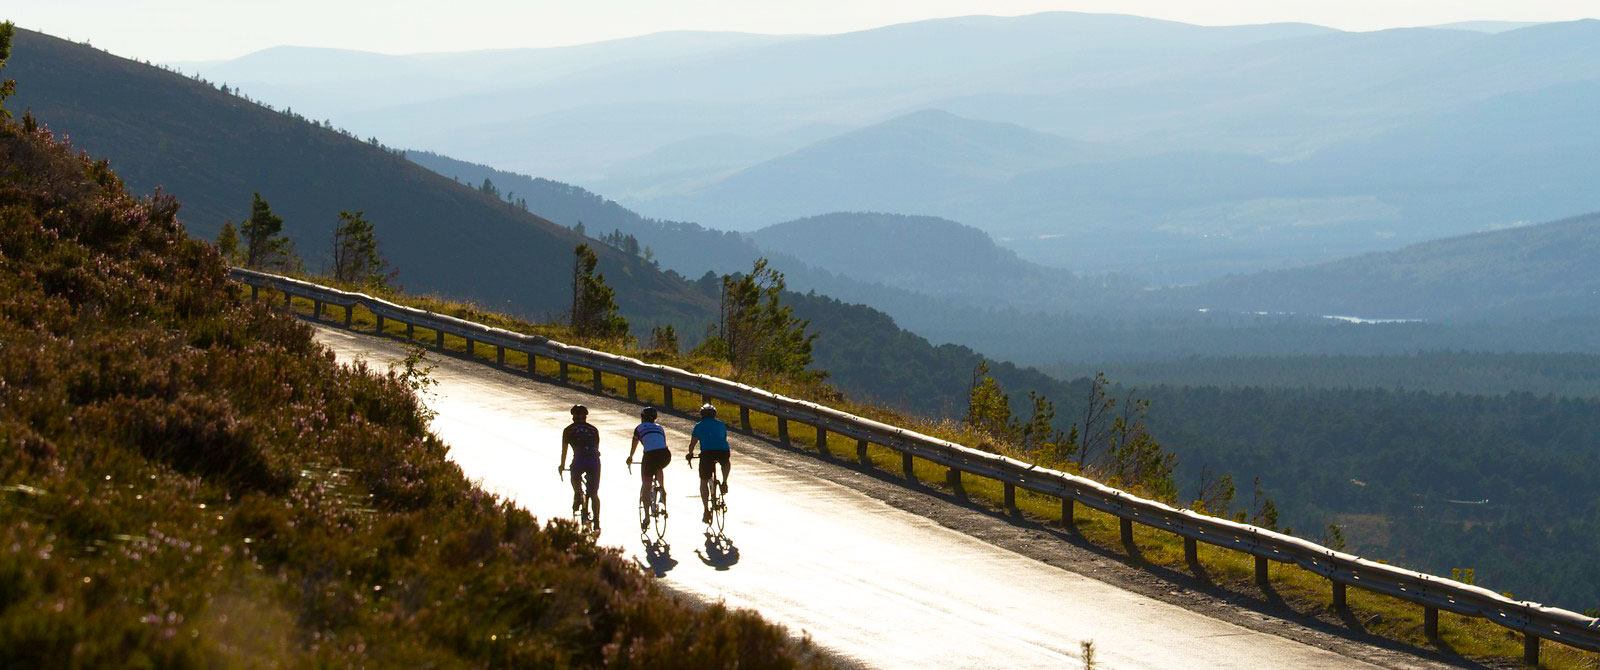 3 cyclists on a road against a mountainous backdrop